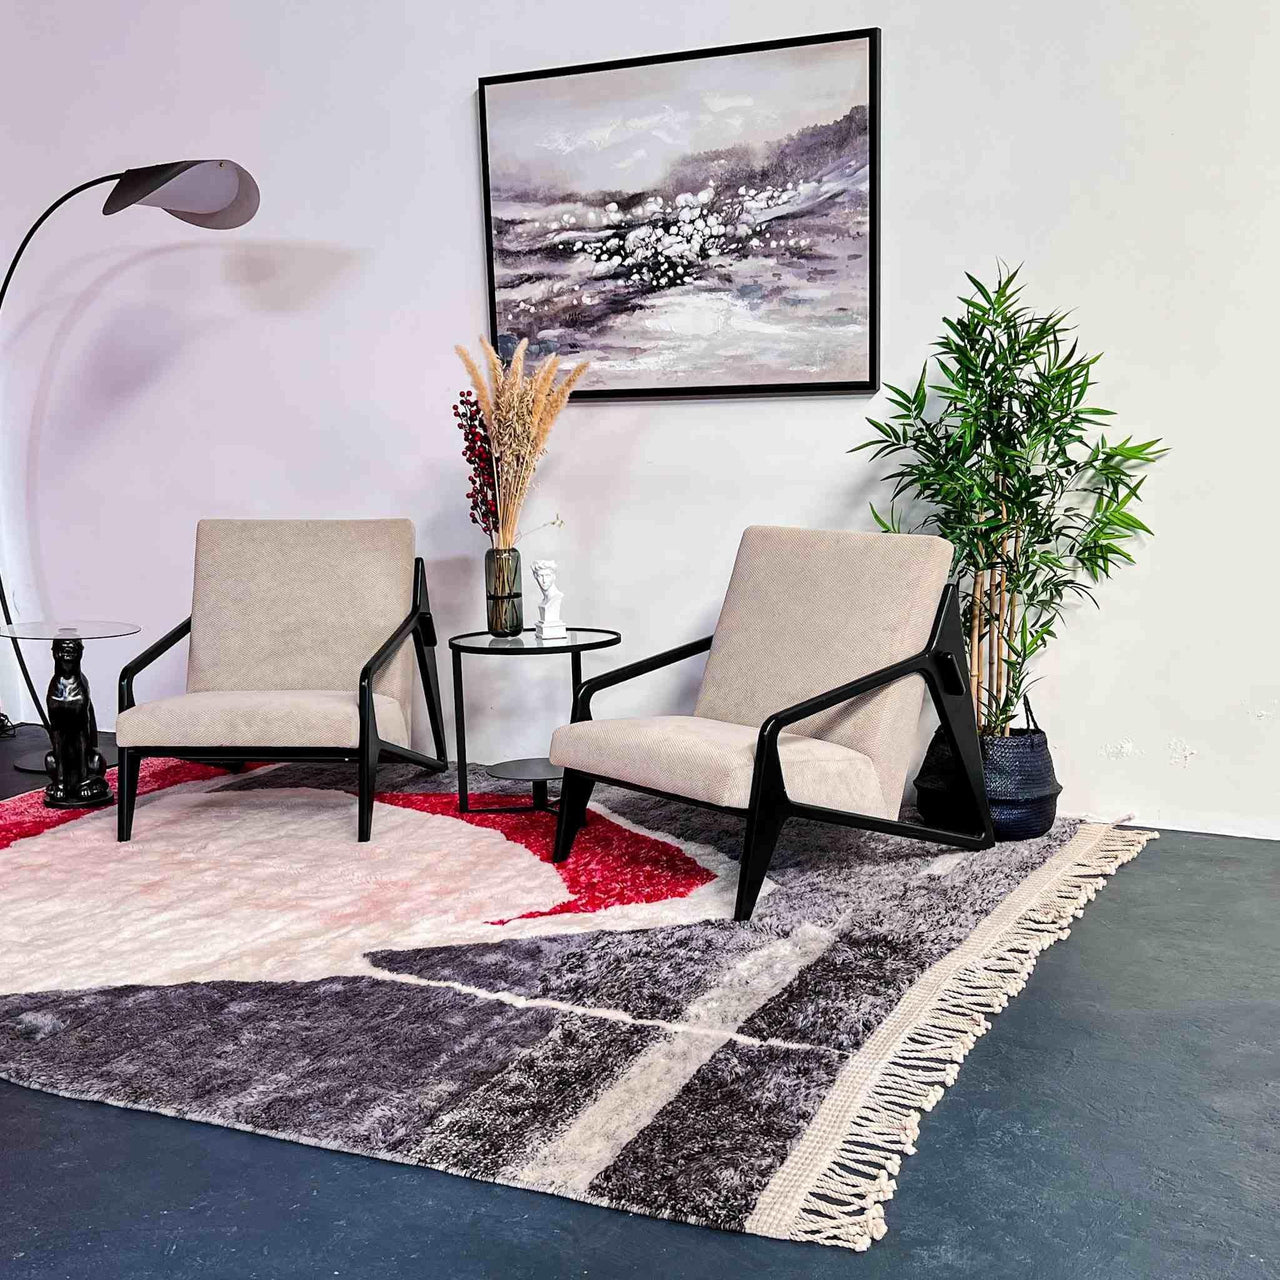 Elevate your decor with the luxurious Rosy Abstract Handwoven 100% Wool Beni Mrirt Rug, made using traditional Beni Ourain rug weaving methods. This 8.1 X 9.9 ft / 247 X 304 cm rug is a stunning addition to any home.